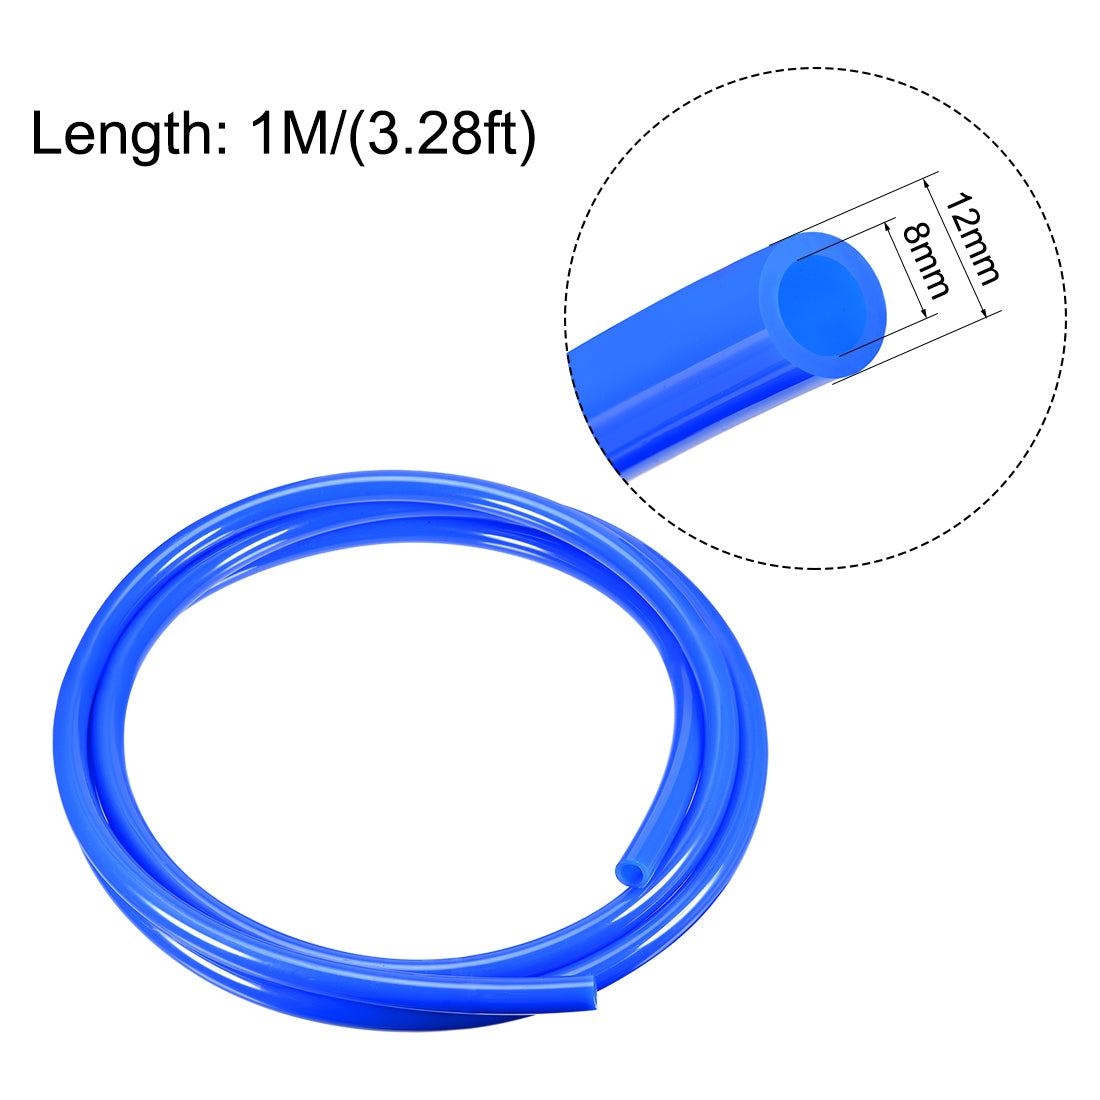 uxcell Uxcell Pneumatic Hose Tubing,12mm OD 8mm ID,Polyurethane PU Air Hose Pipe Tube,1 Meter 3.28ft,Blue